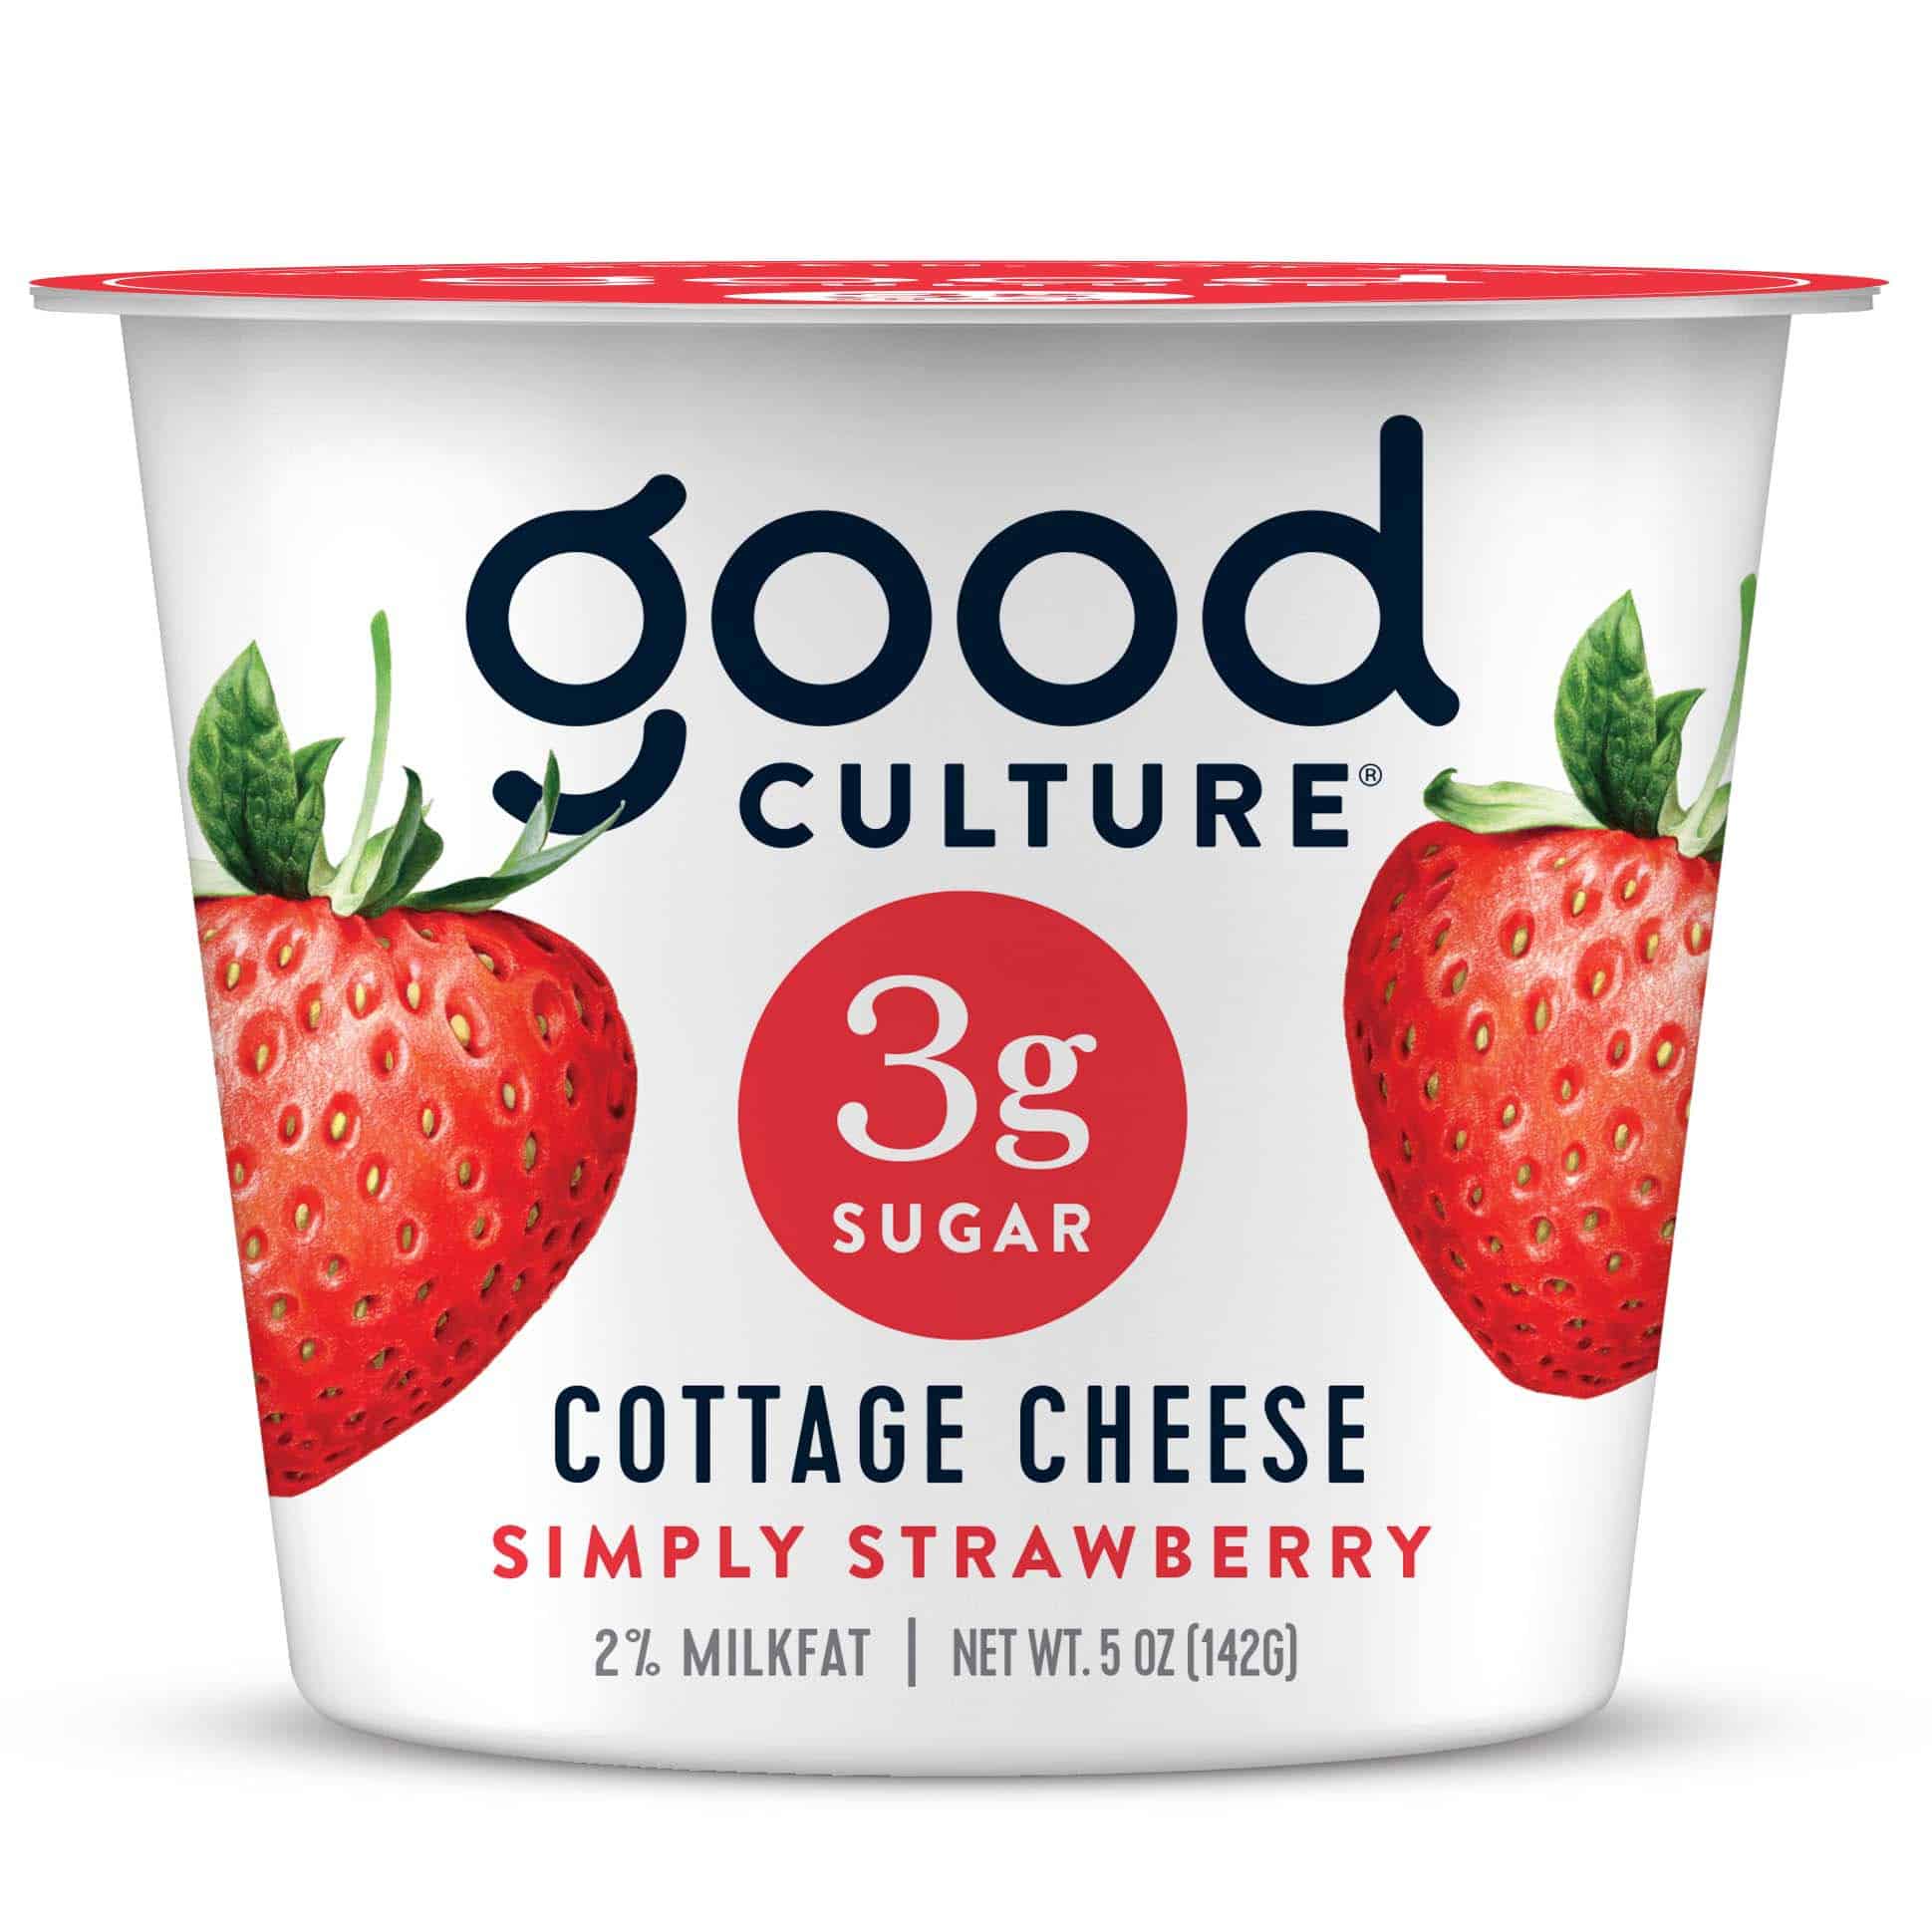 Good Culture 3G Sugar Strawberry Cottage Cheese